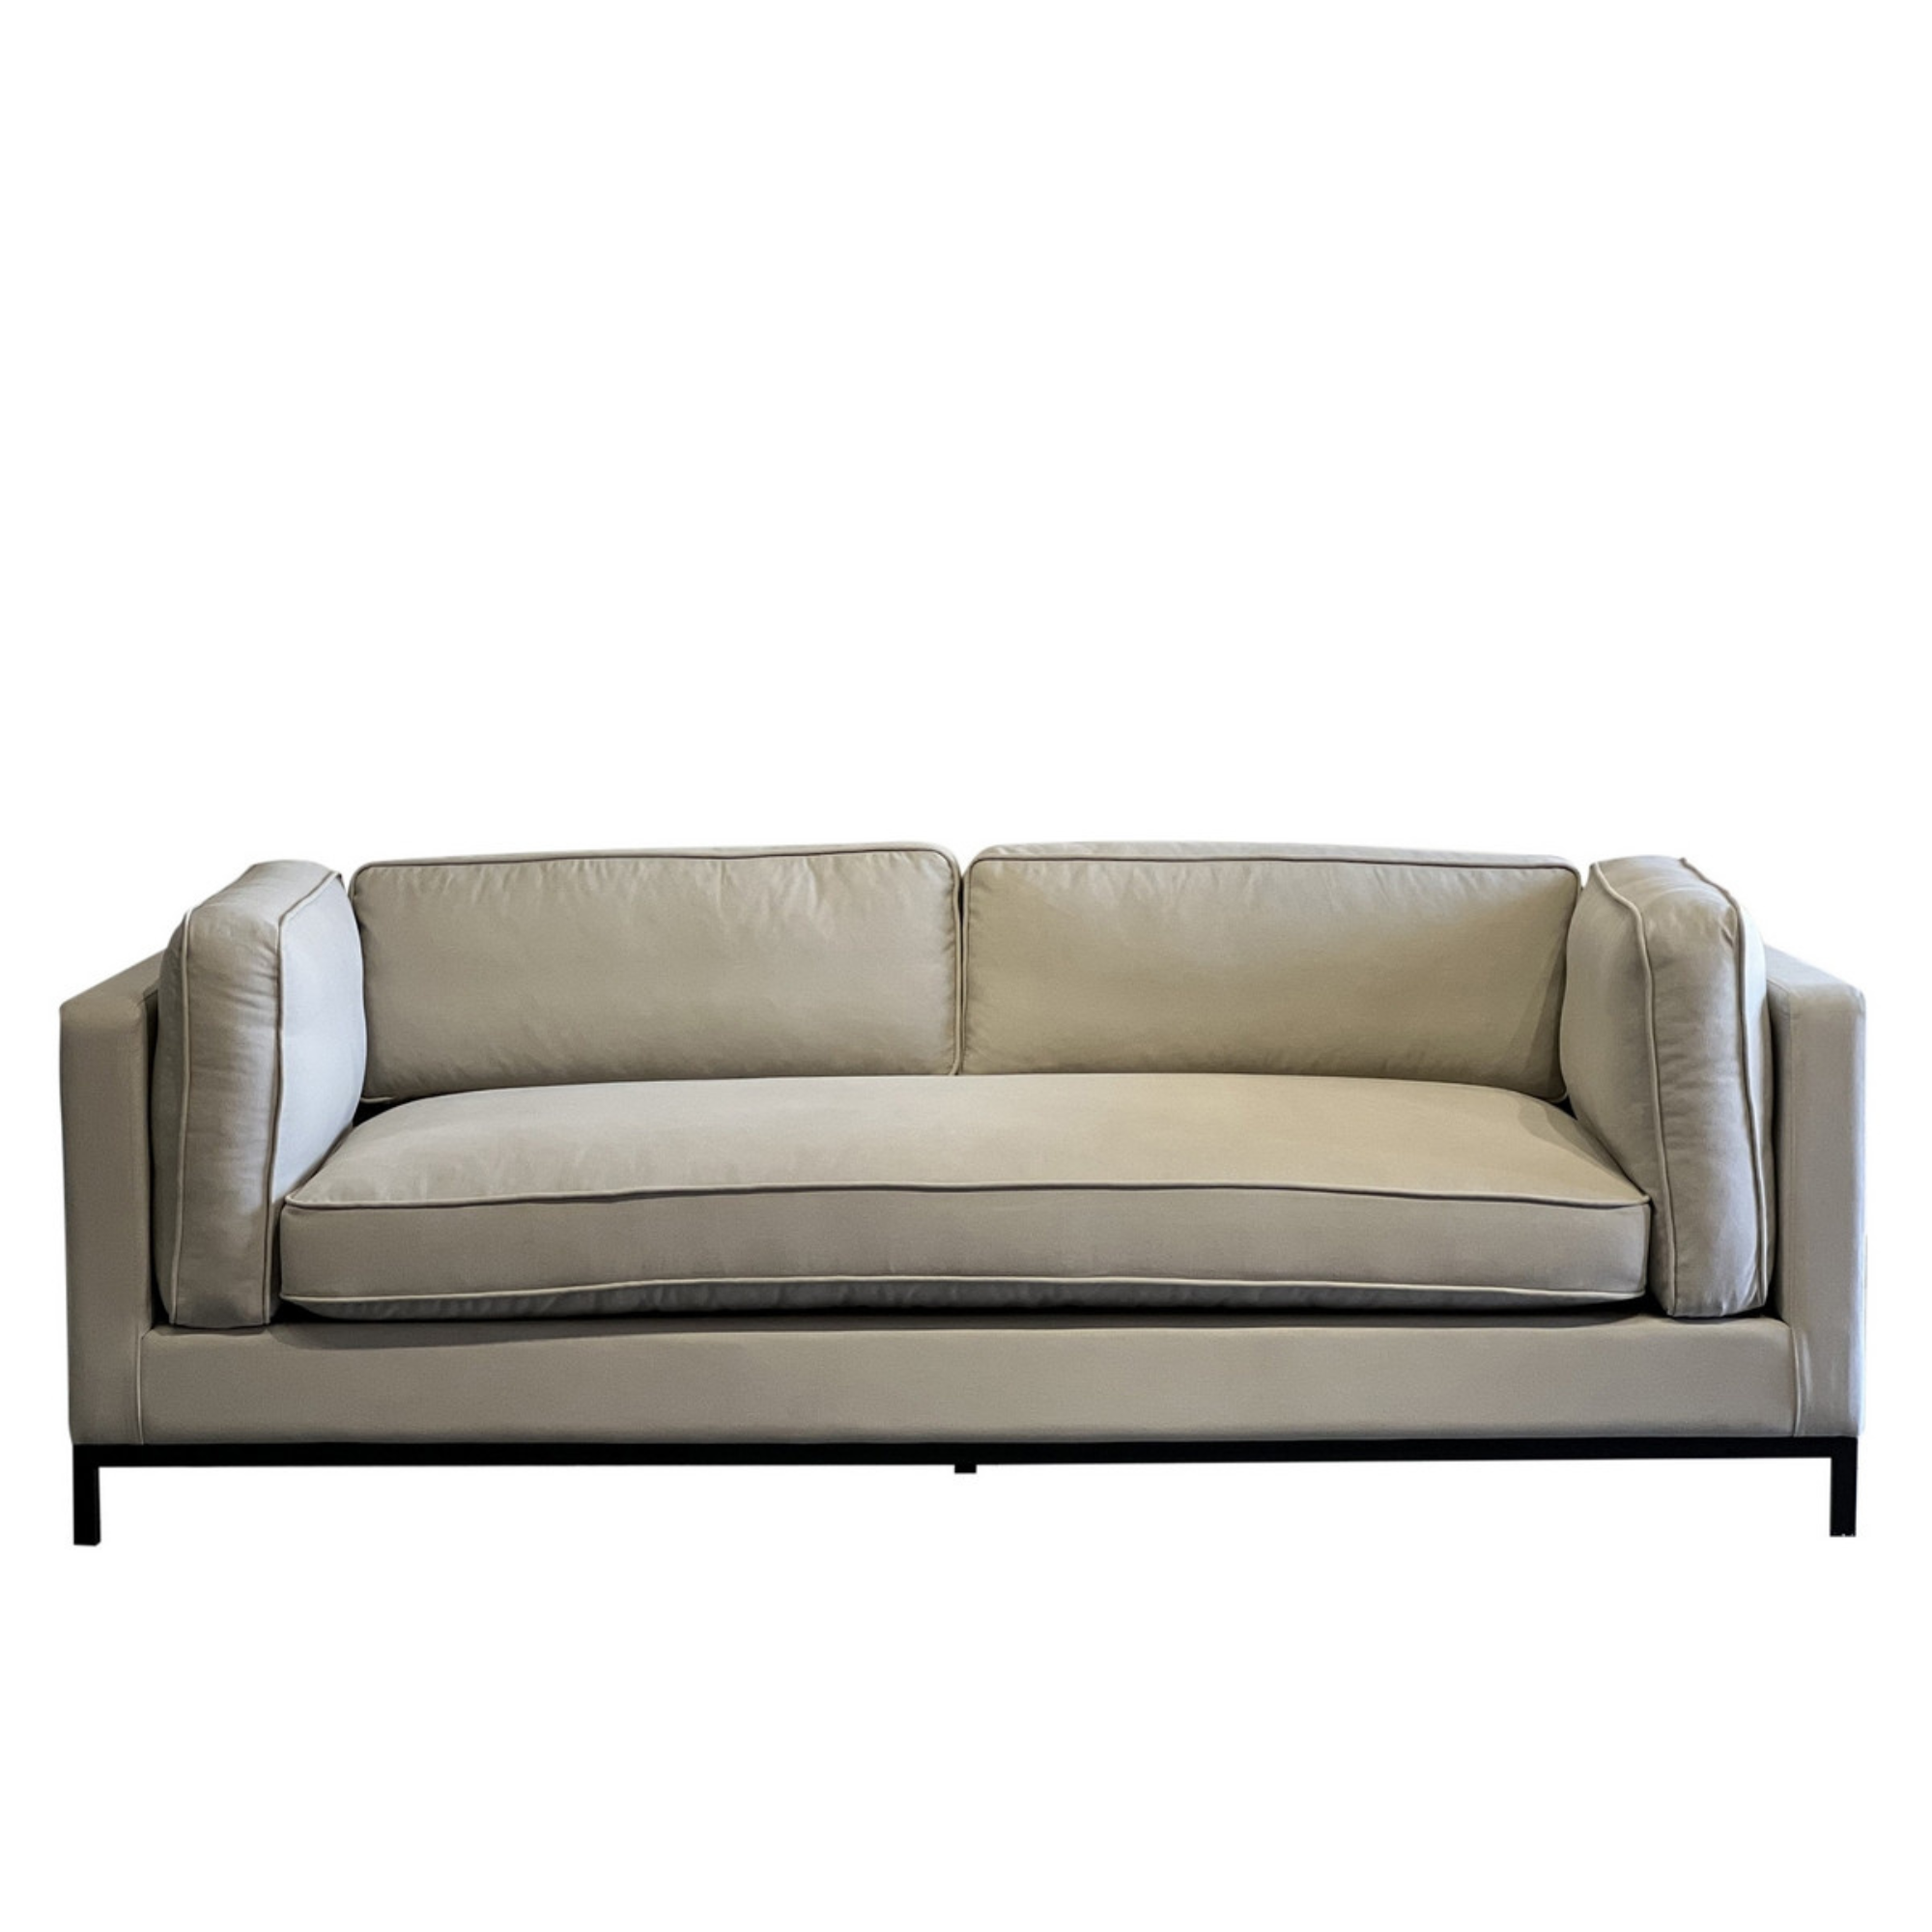 MANCHESTER 3 SEATER SOFA | 2 COLOURS